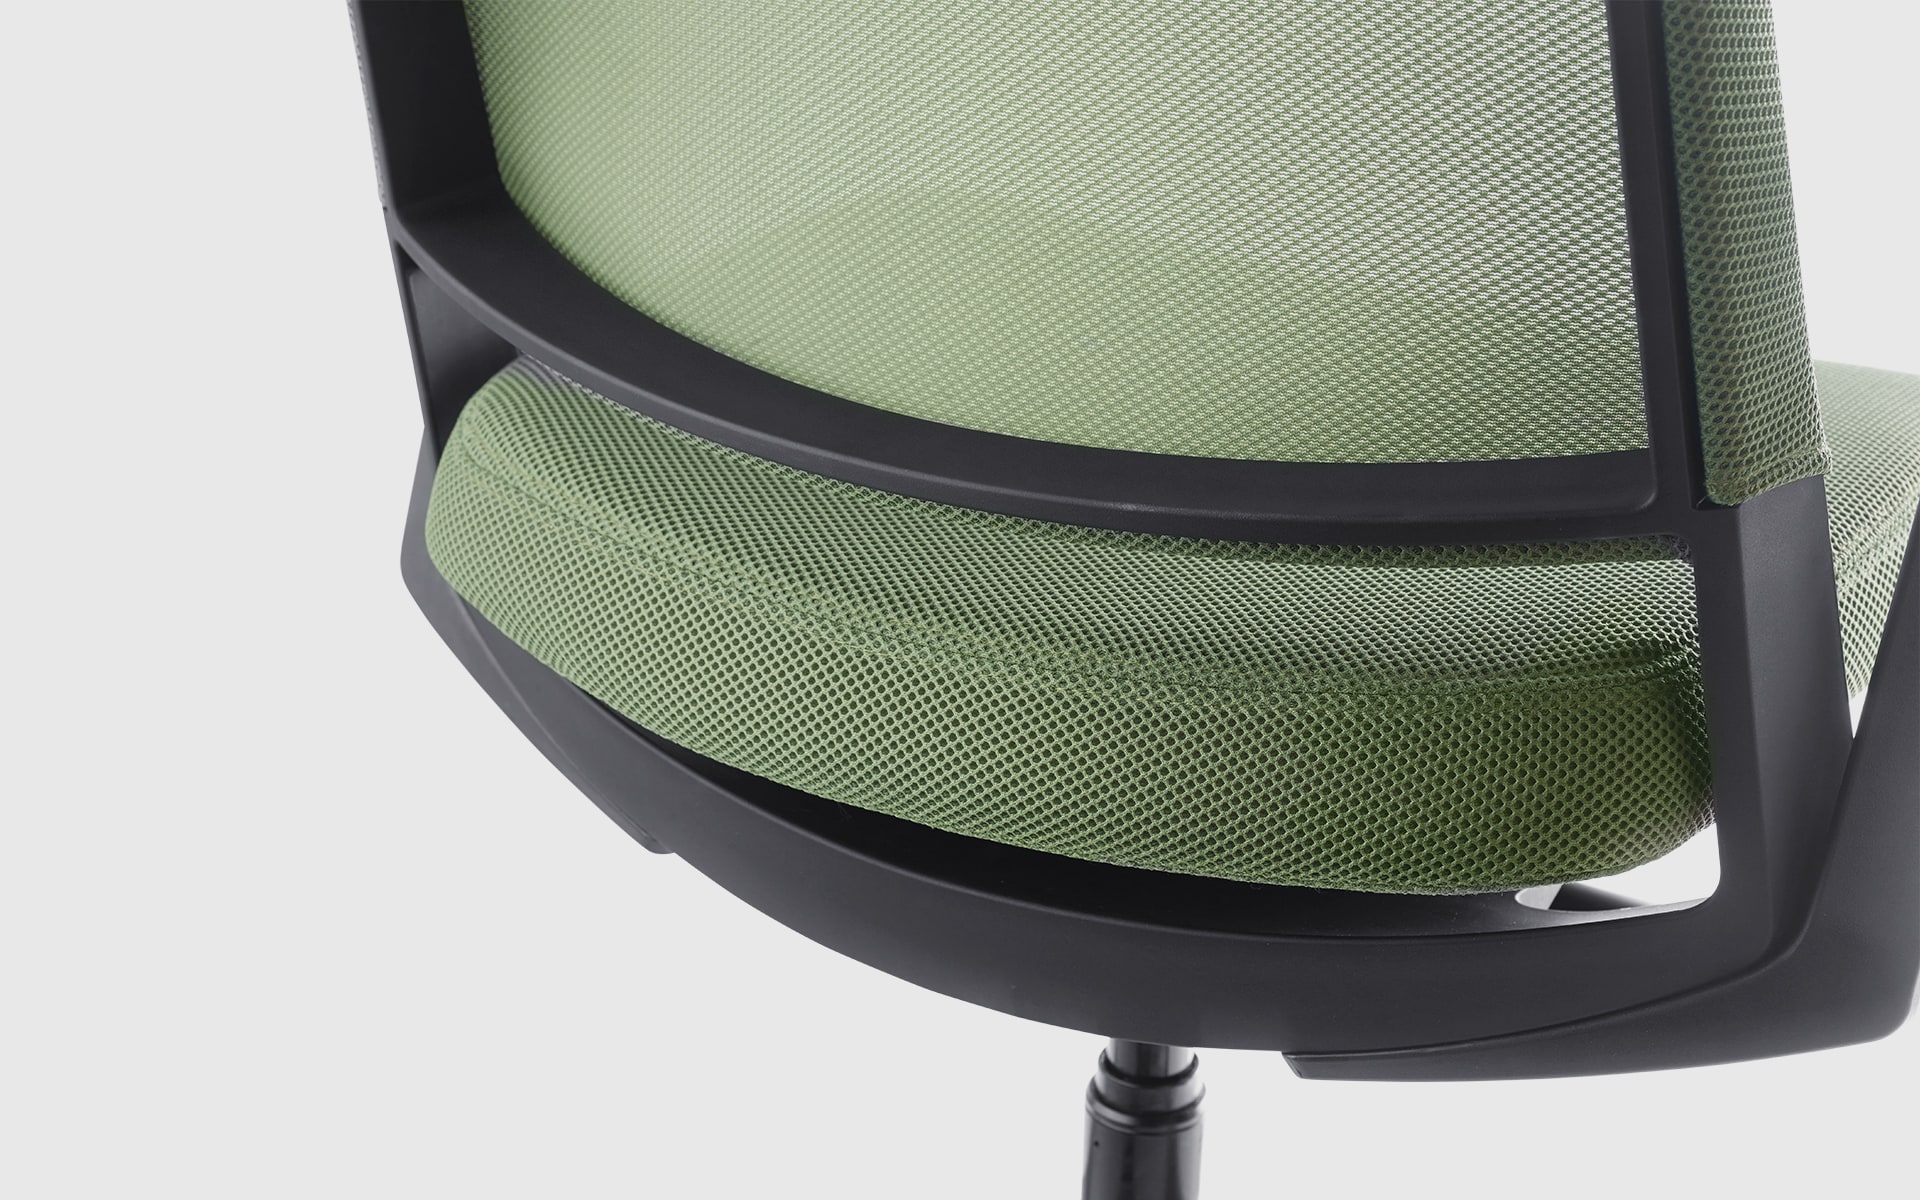 Close-up of the Forma5 Kineo office chair by ITO Design with pale green mesh upholstery